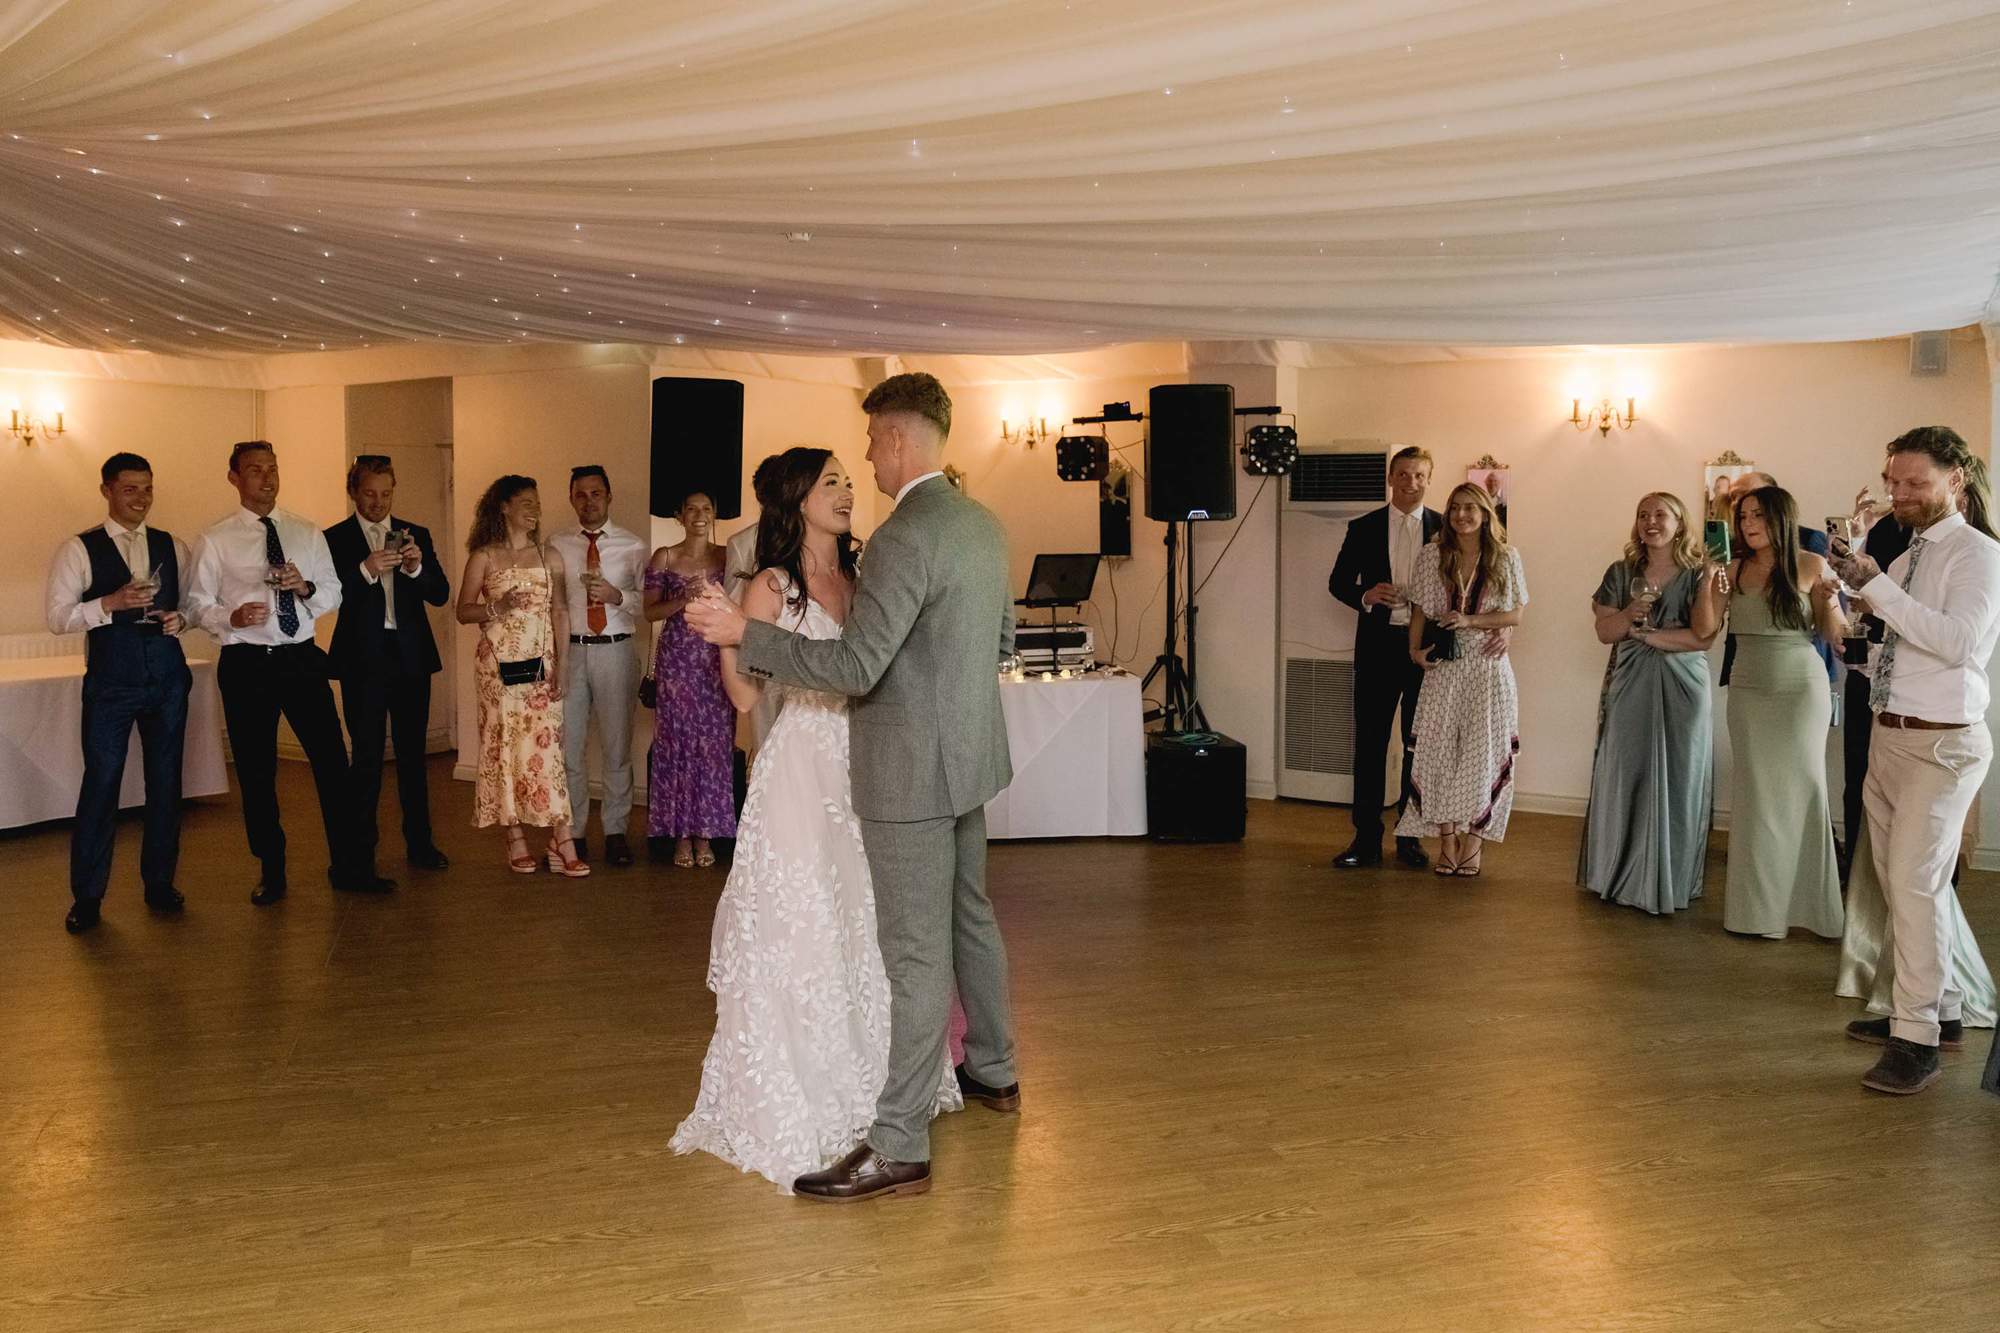 Bride and groom have their first dance together on their wedding day at Southdowns Manor.